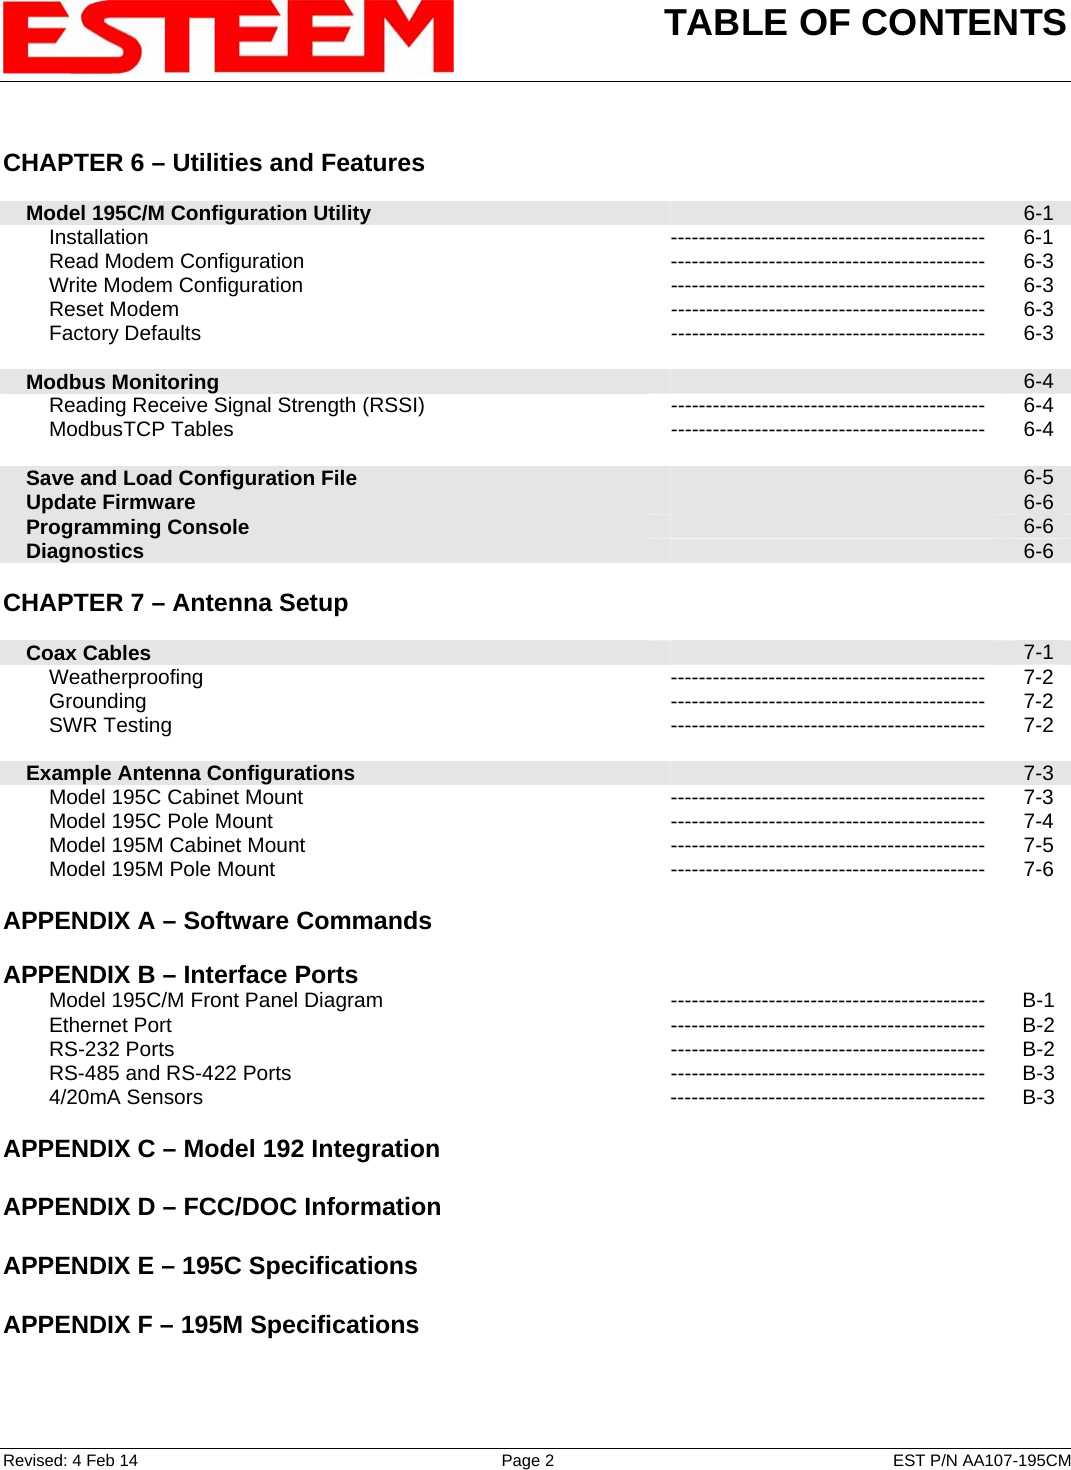 TABLE OF CONTENTS    Revised: 4 Feb 14  Page 2  EST P/N AA107-195CM  CHAPTER 6 – Utilities and Features         Model 195C/M Configuration Utility   6-1         Installation --------------------------------------------- 6-1         Read Modem Configuration --------------------------------------------- 6-3         Write Modem Configuration --------------------------------------------- 6-3         Reset Modem  ---------------------------------------------  6-3         Factory Defaults  ---------------------------------------------  6-3        Modbus Monitoring   6-4         Reading Receive Signal Strength (RSSI)  ---------------------------------------------  6-4         ModbusTCP Tables  ---------------------------------------------  6-4        Save and Load Configuration File   6-5     Update Firmware   6-6     Programming Console   6-6     Diagnostics   6-6    CHAPTER 7 – Antenna Setup          Coax Cables   7-1         Weatherproofing --------------------------------------------- 7-2         Grounding  ---------------------------------------------  7-2         SWR Testing  ---------------------------------------------  7-2        Example Antenna Configurations   7-3         Model 195C Cabinet Mount --------------------------------------------- 7-3         Model 195C Pole Mount --------------------------------------------- 7-4         Model 195M Cabinet Mount --------------------------------------------- 7-5         Model 195M Pole Mount --------------------------------------------- 7-6    APPENDIX A – Software Commands       APPENDIX B – Interface Ports            Model 195C/M Front Panel Diagram --------------------------------------------- B-1         Ethernet Port --------------------------------------------- B-2         RS-232 Ports  ---------------------------------------------  B-2         RS-485 and RS-422 Ports --------------------------------------------- B-3         4/20mA Sensors --------------------------------------------- B-3    APPENDIX C – Model 192 Integration       APPENDIX D – FCC/DOC Information       APPENDIX E – 195C Specifications       APPENDIX F – 195M Specifications     